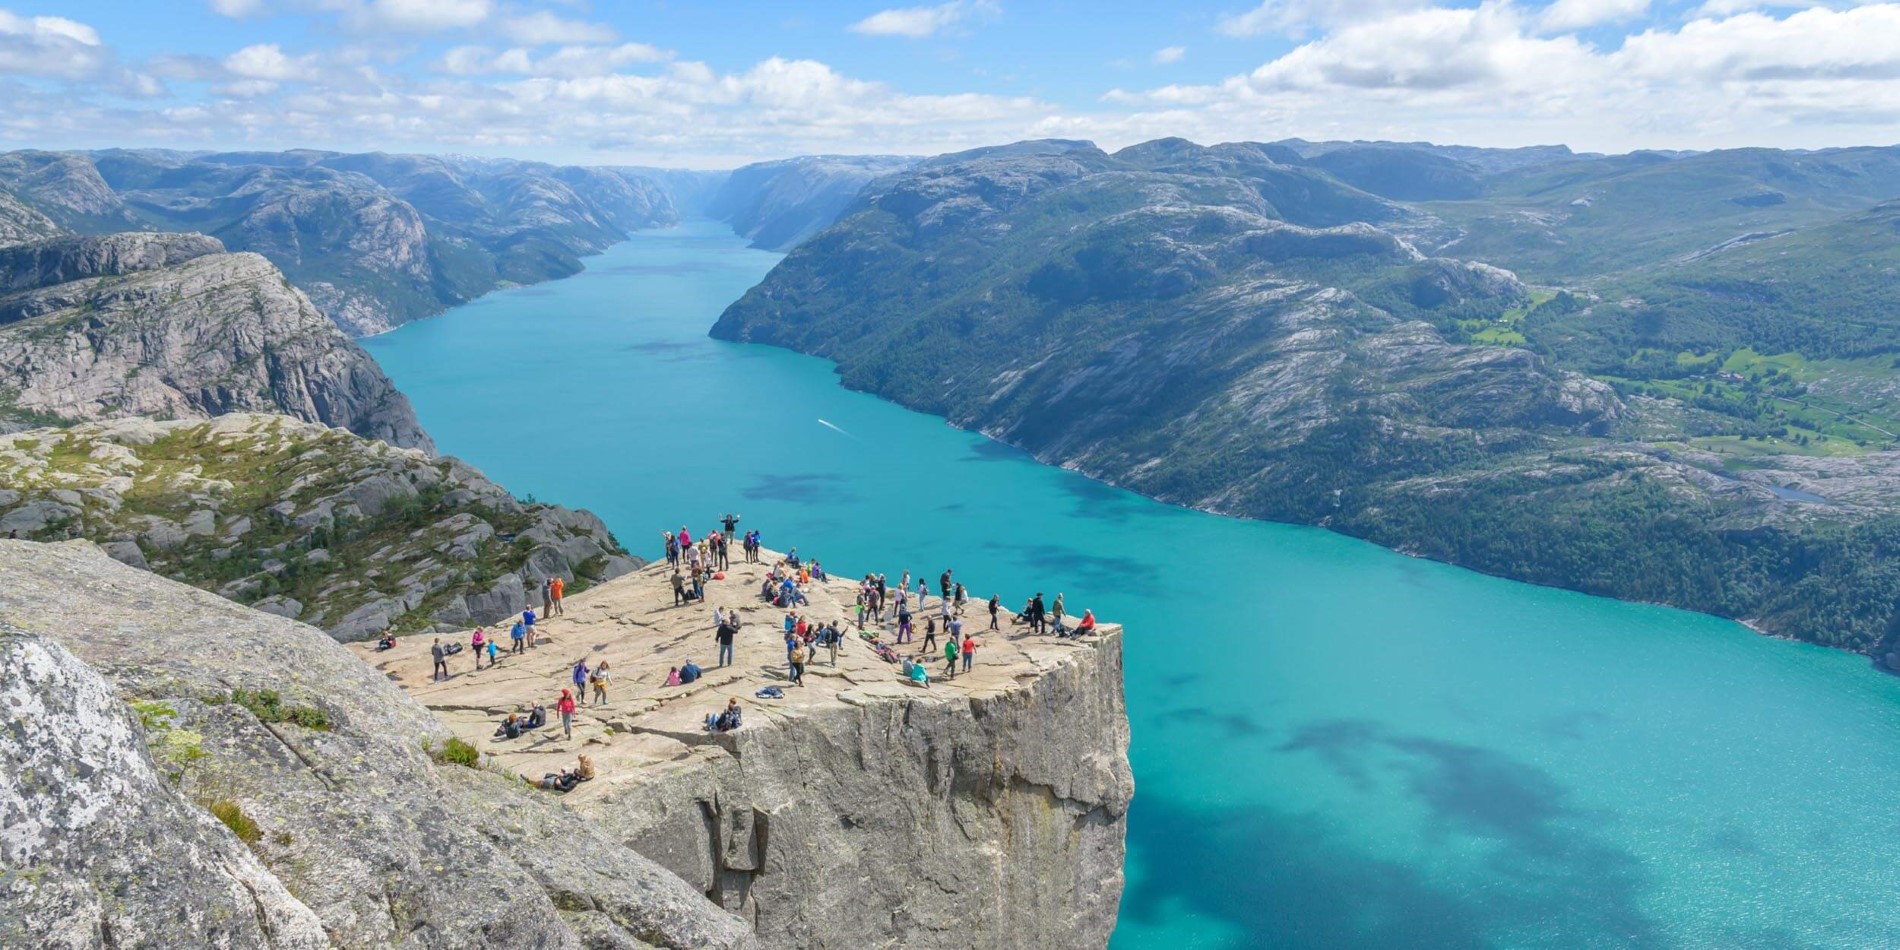 A group of people on a rock next to water with Preikestolen in the background